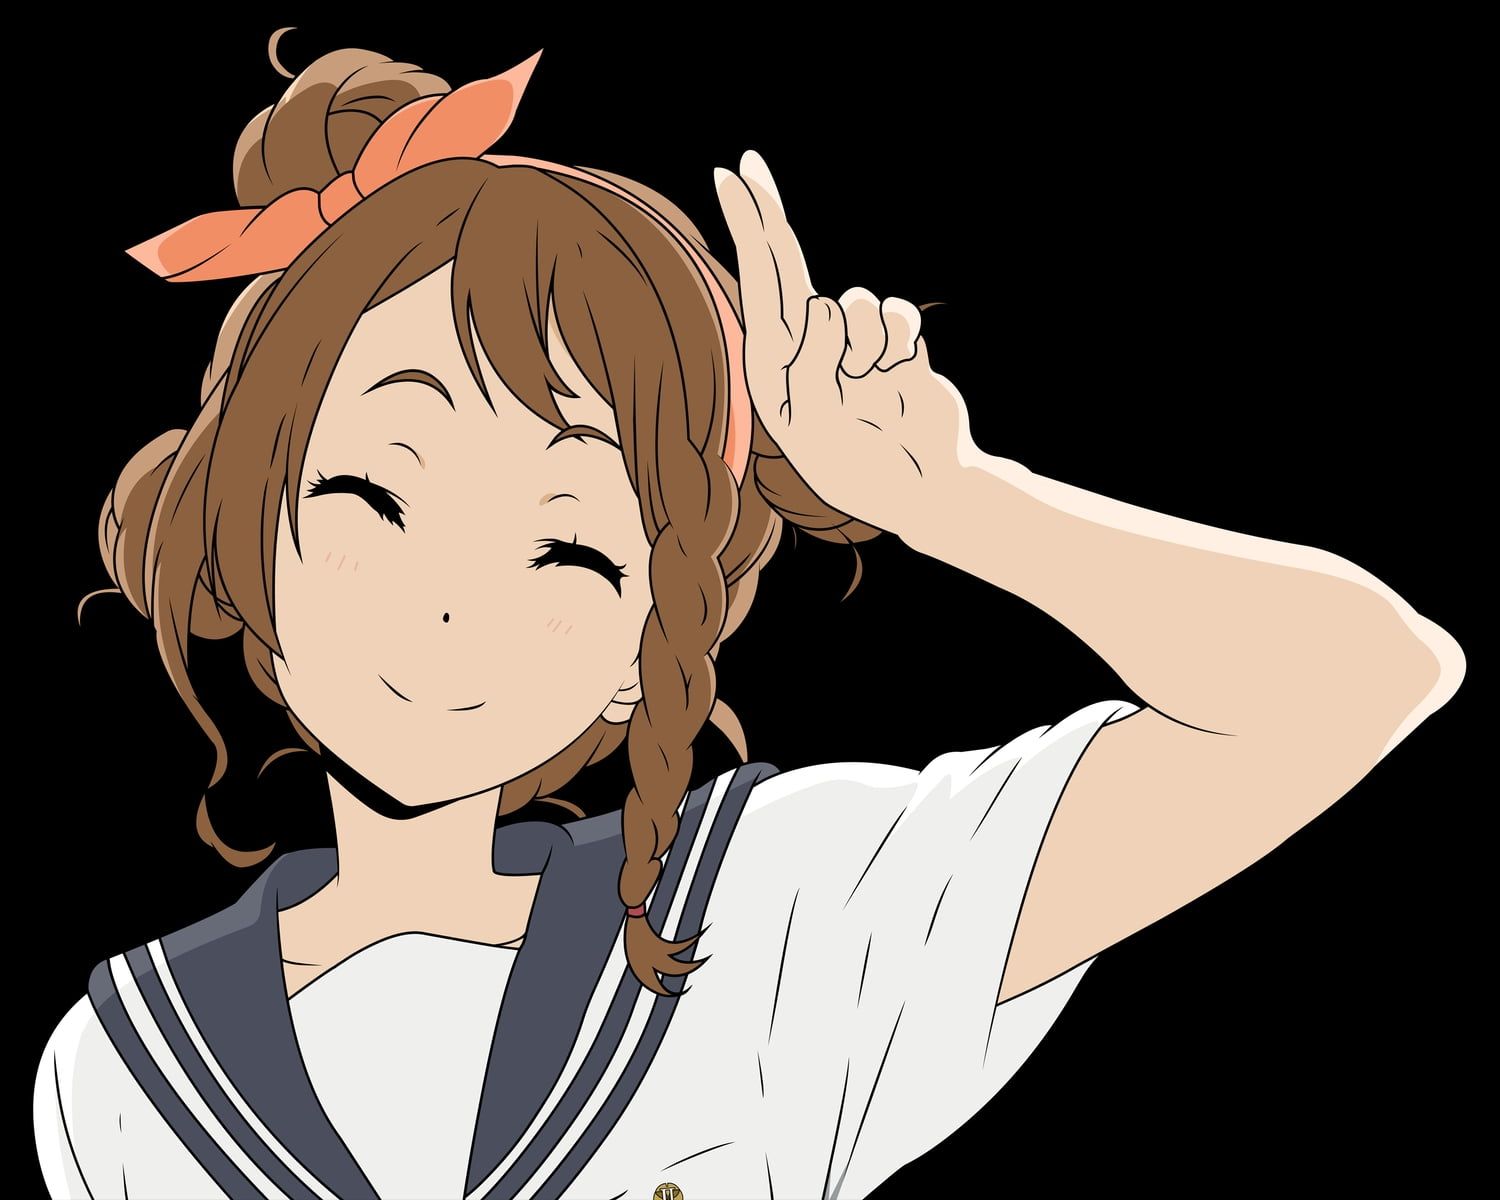 Female anime character with brown braided hair and wearing white.